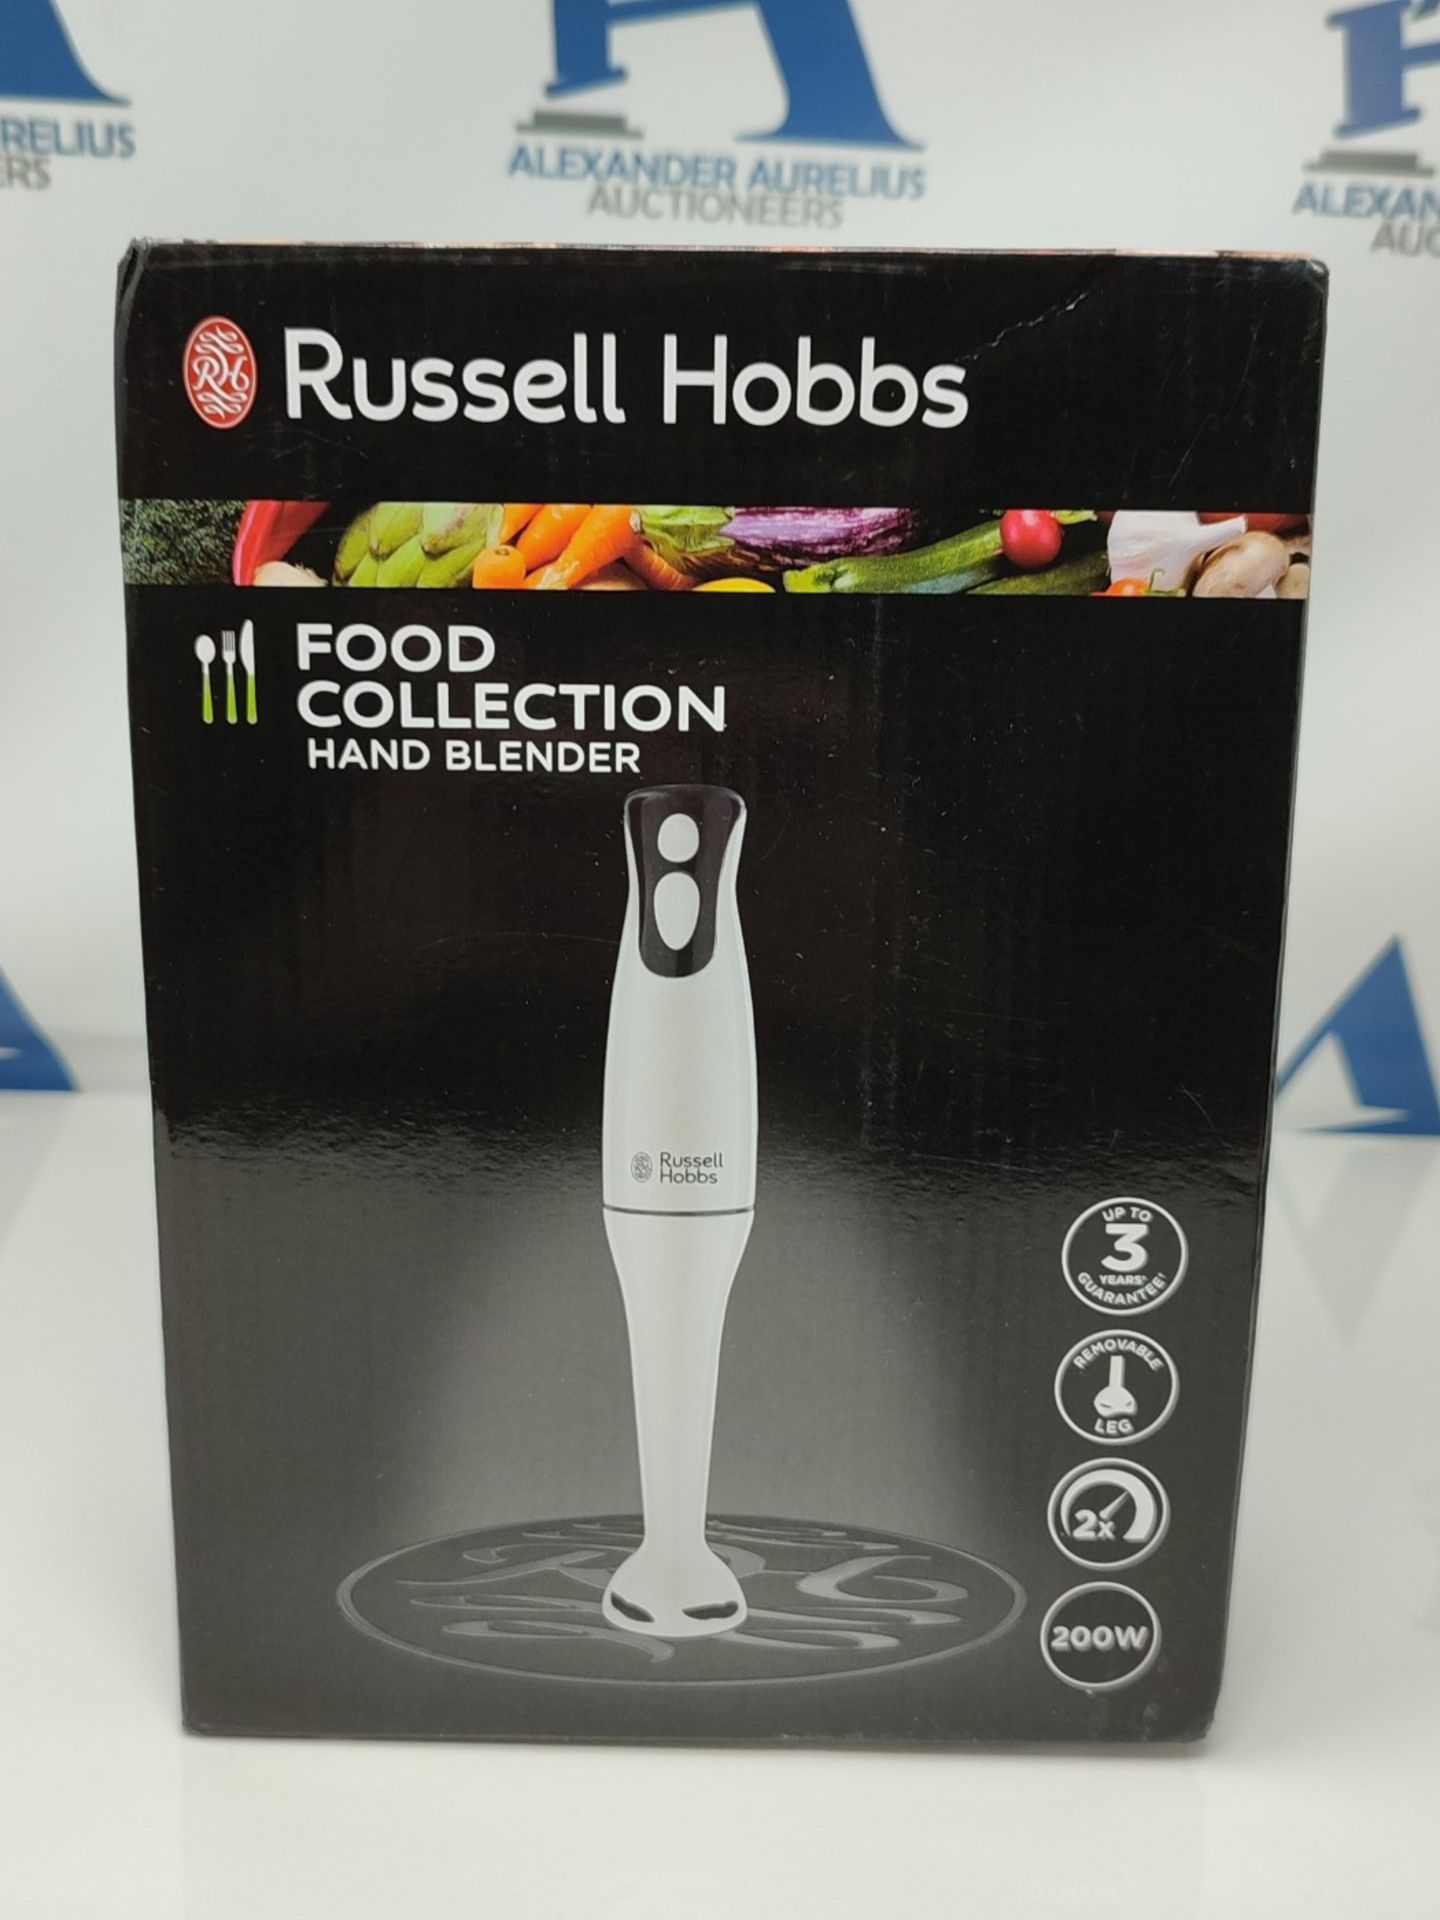 Russell Hobbs 22241 Food Collection Hand Blender, 200 W - White - Image 2 of 3